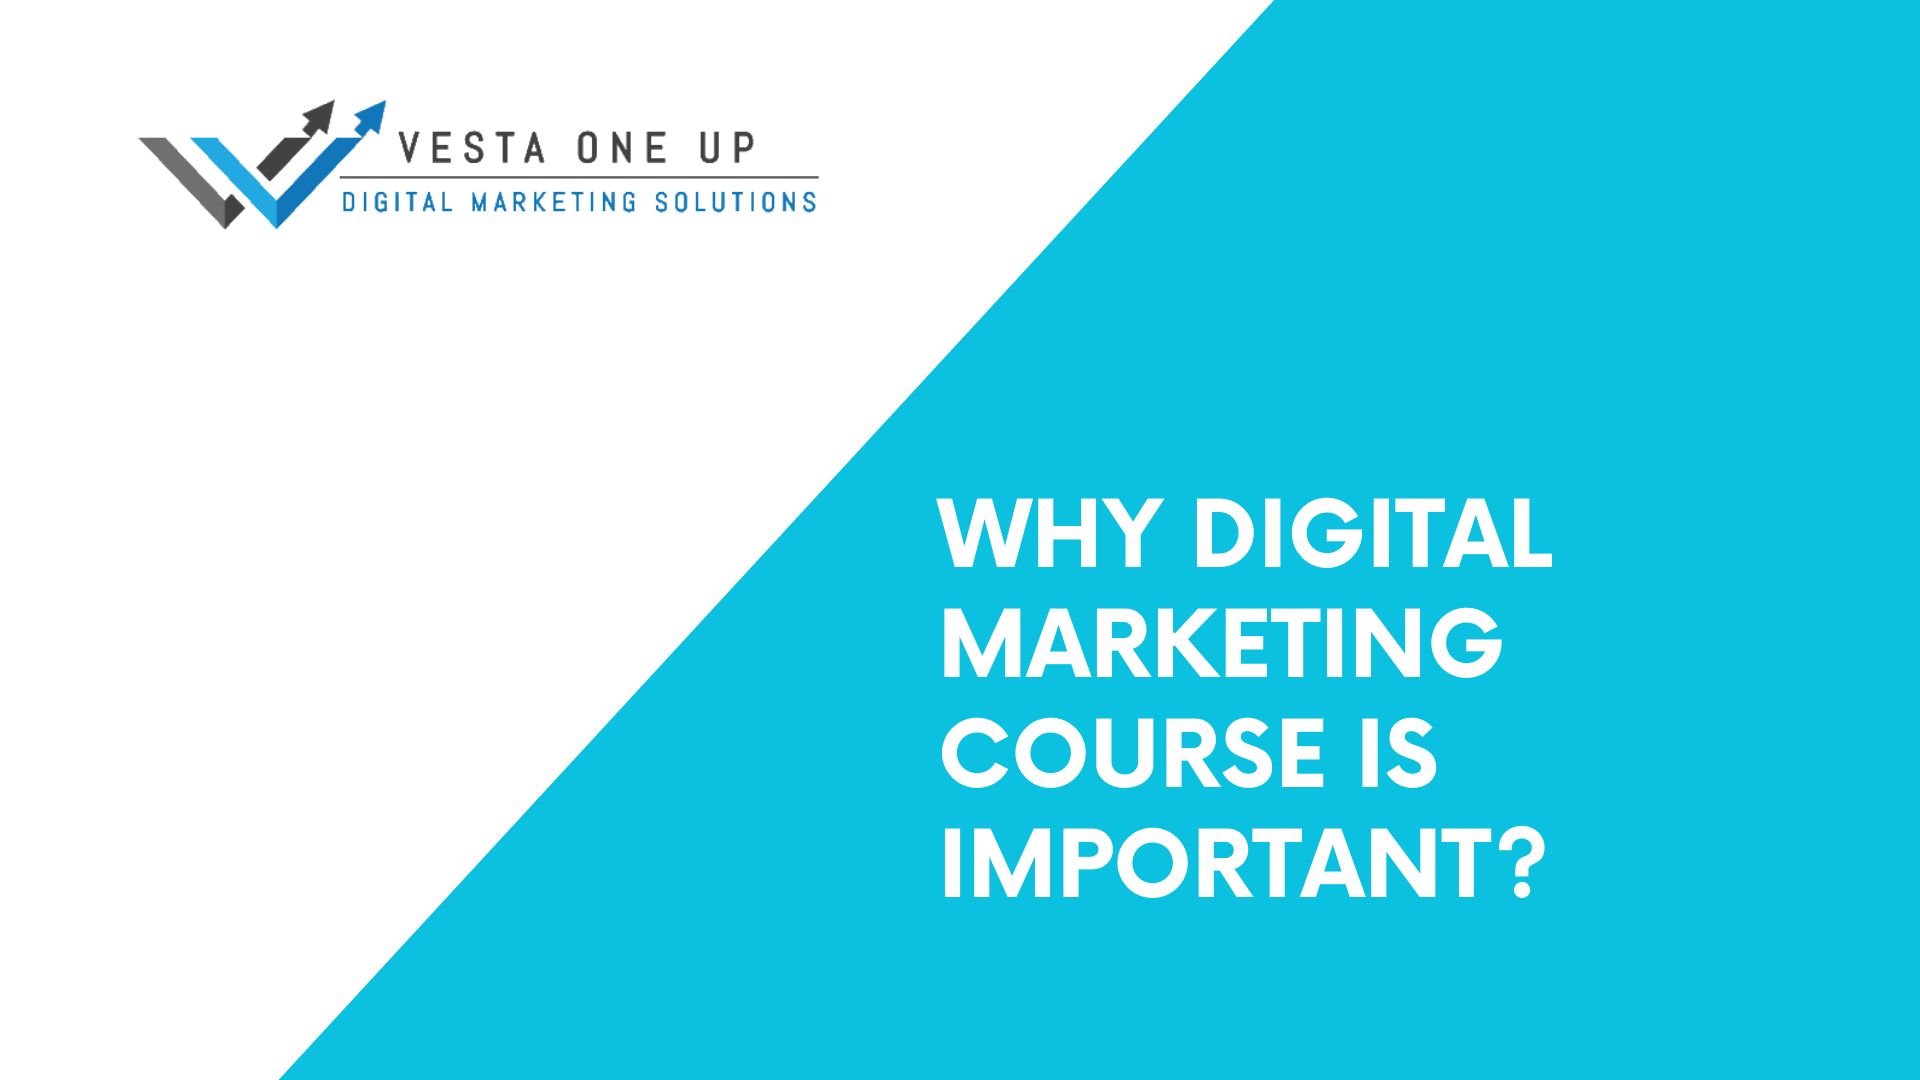 Why digital marketing course is important?